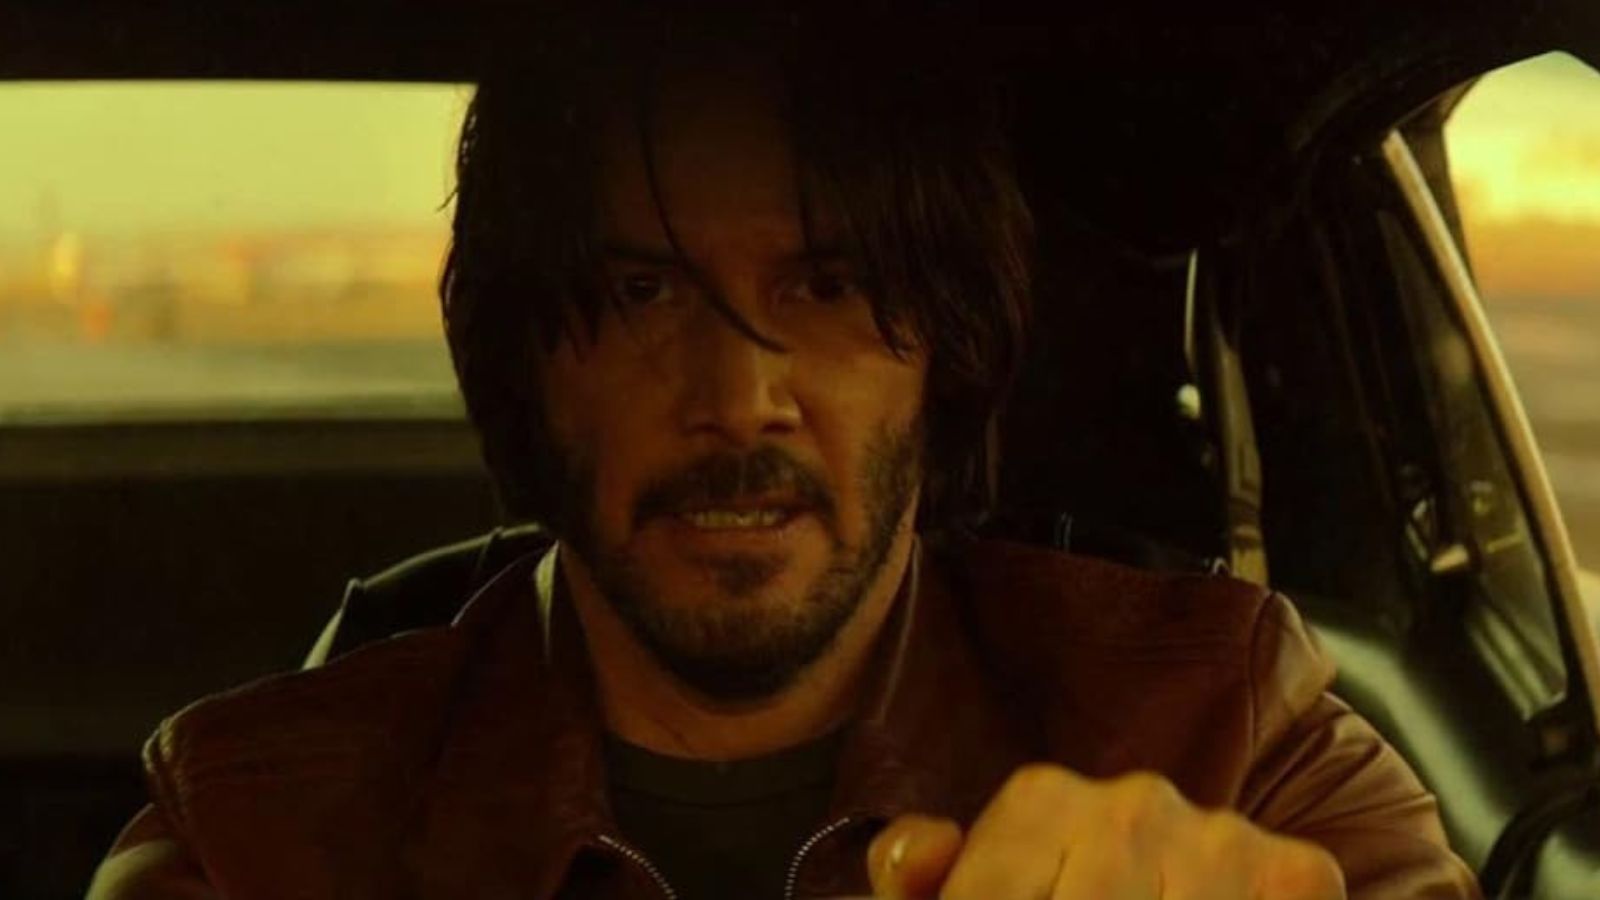 After the death of his wife, retired hitman John Wick (Keanu Reeves) is given a puppy to remember her by. After a group of Russian gangsters kill her and beat Wick, he hunts them down for payback, immersing himself back into the criminal life. The movie was praised for <a class="editor-rtfLink" href="https://www.rogerebert.com/reviews/john-wick-2014" rel="noopener">establishing an underworld with its own rules</a> and rituals.